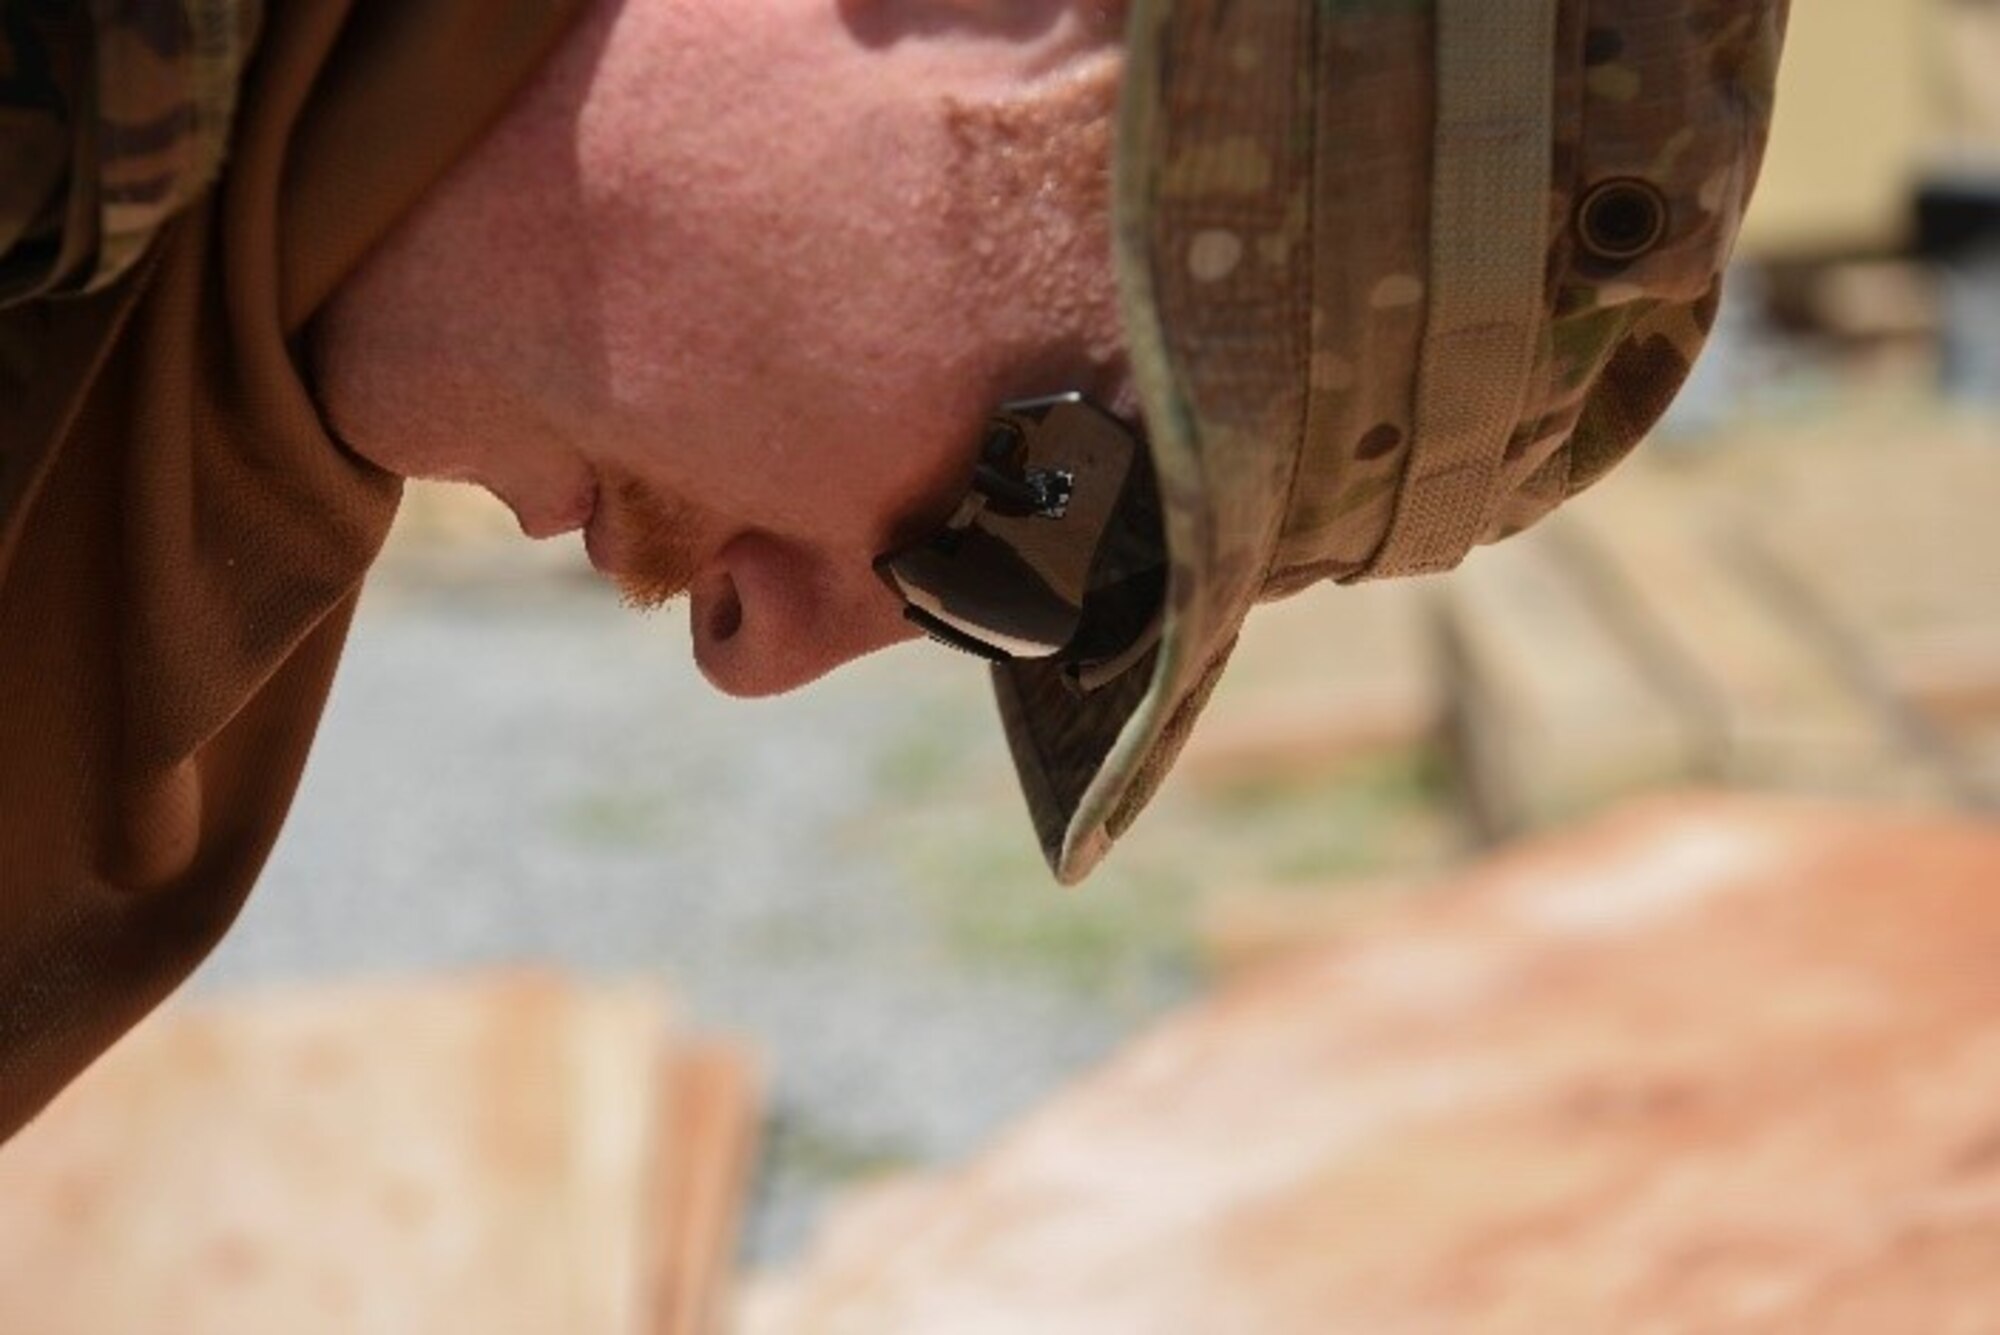 U.S. Air Force Staff Sgt. Garison Dollar, 786th Civil Engineer Squadron structural specialist, cuts a wall template for a tent March 23, 2021, at Camp Simba, Kenya. The 786th CES provided Camp Simba with building new structures, water systems and maintenance so the base can provide continued vigilance to the Combined Joint Task Force-Horn of Africa area of responsibility.